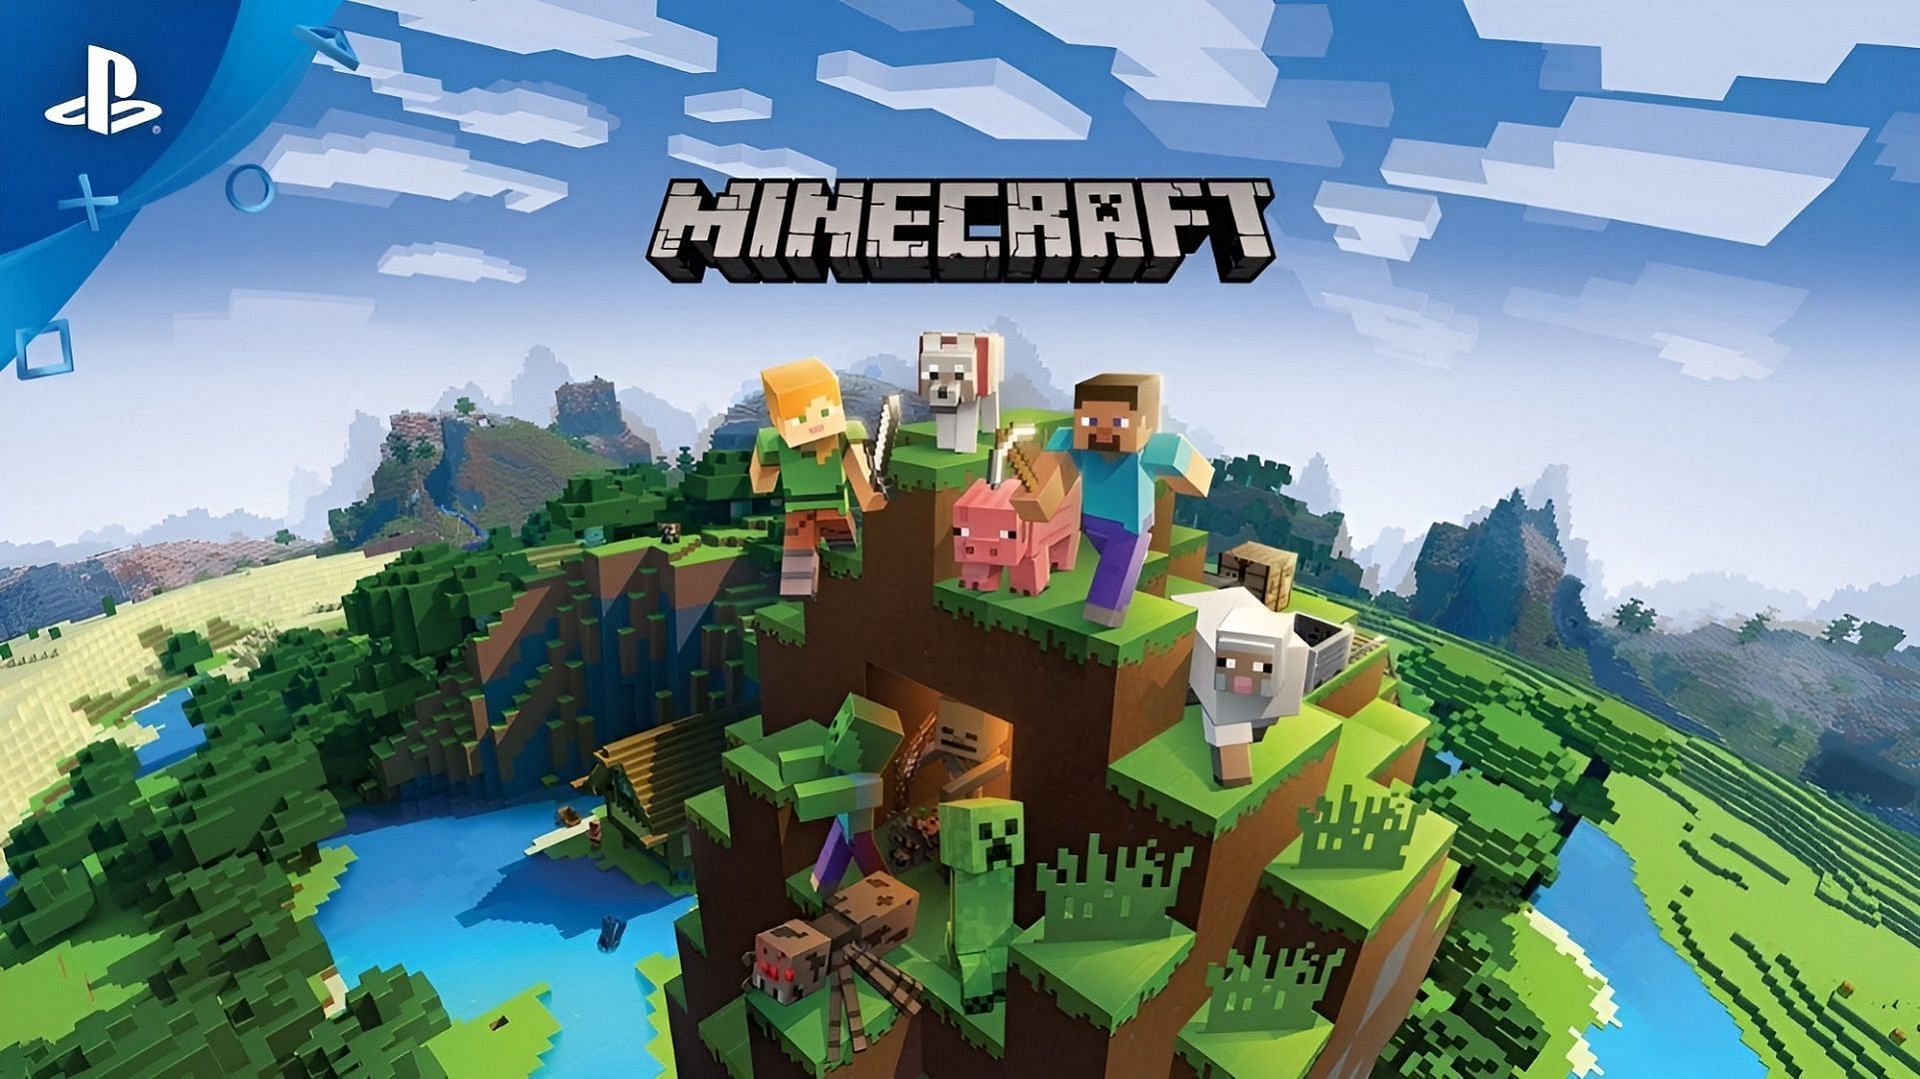 Previews are recent arrivals on the PlayStation 4 platform (Image via Mojang/Sony)